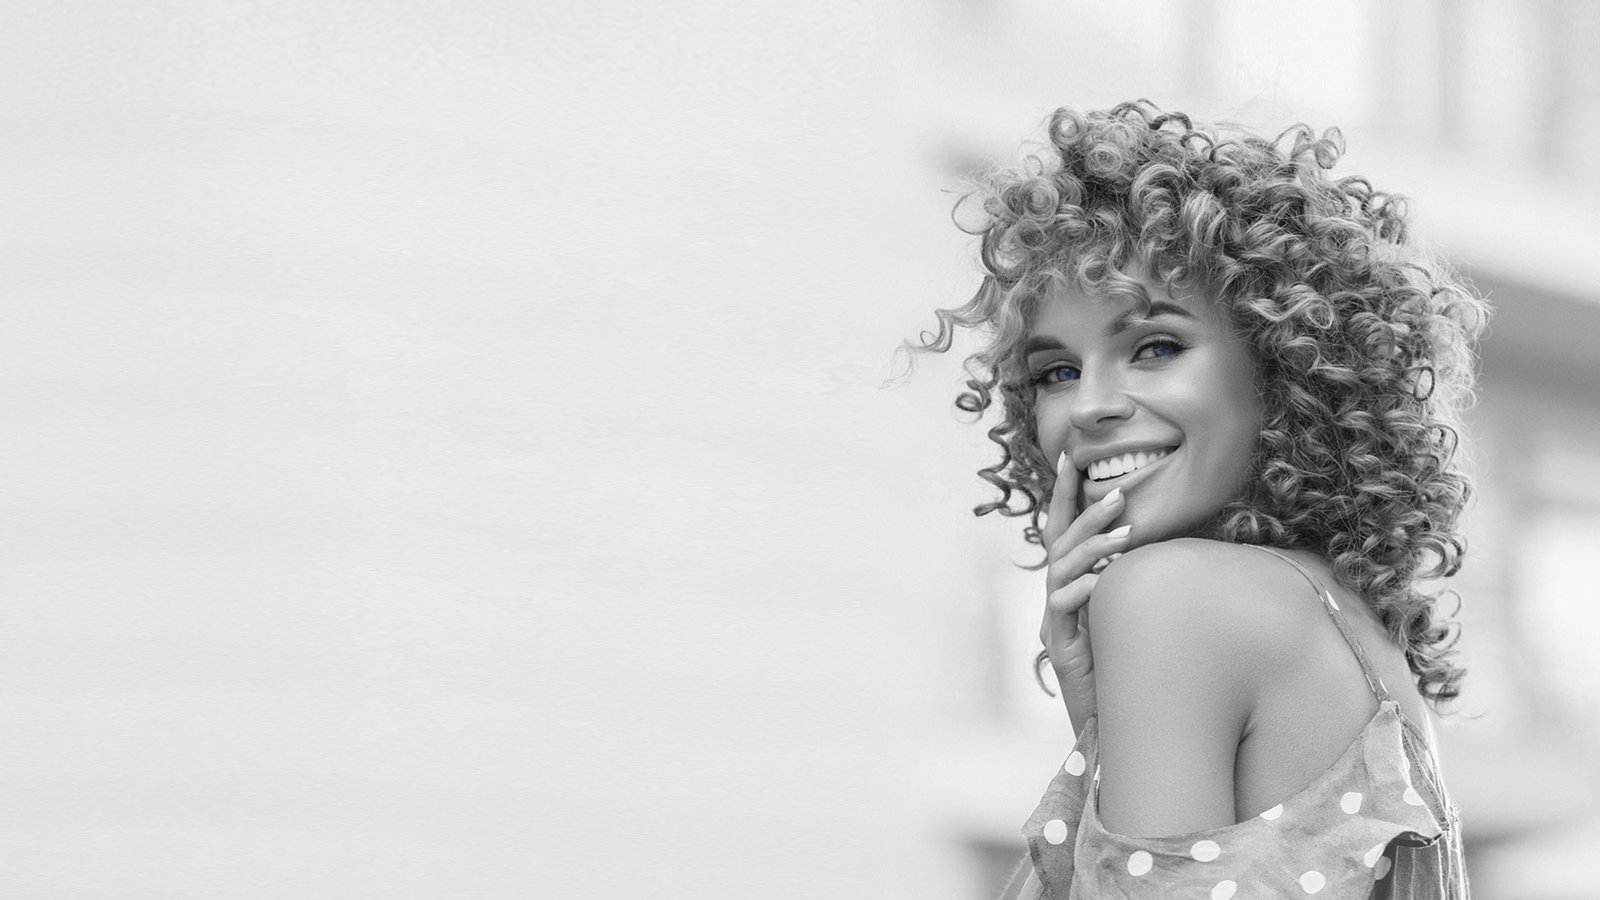 Hero Image of a beautiful woman with curly hair smiling | Preferred Aesthetics & Wellness